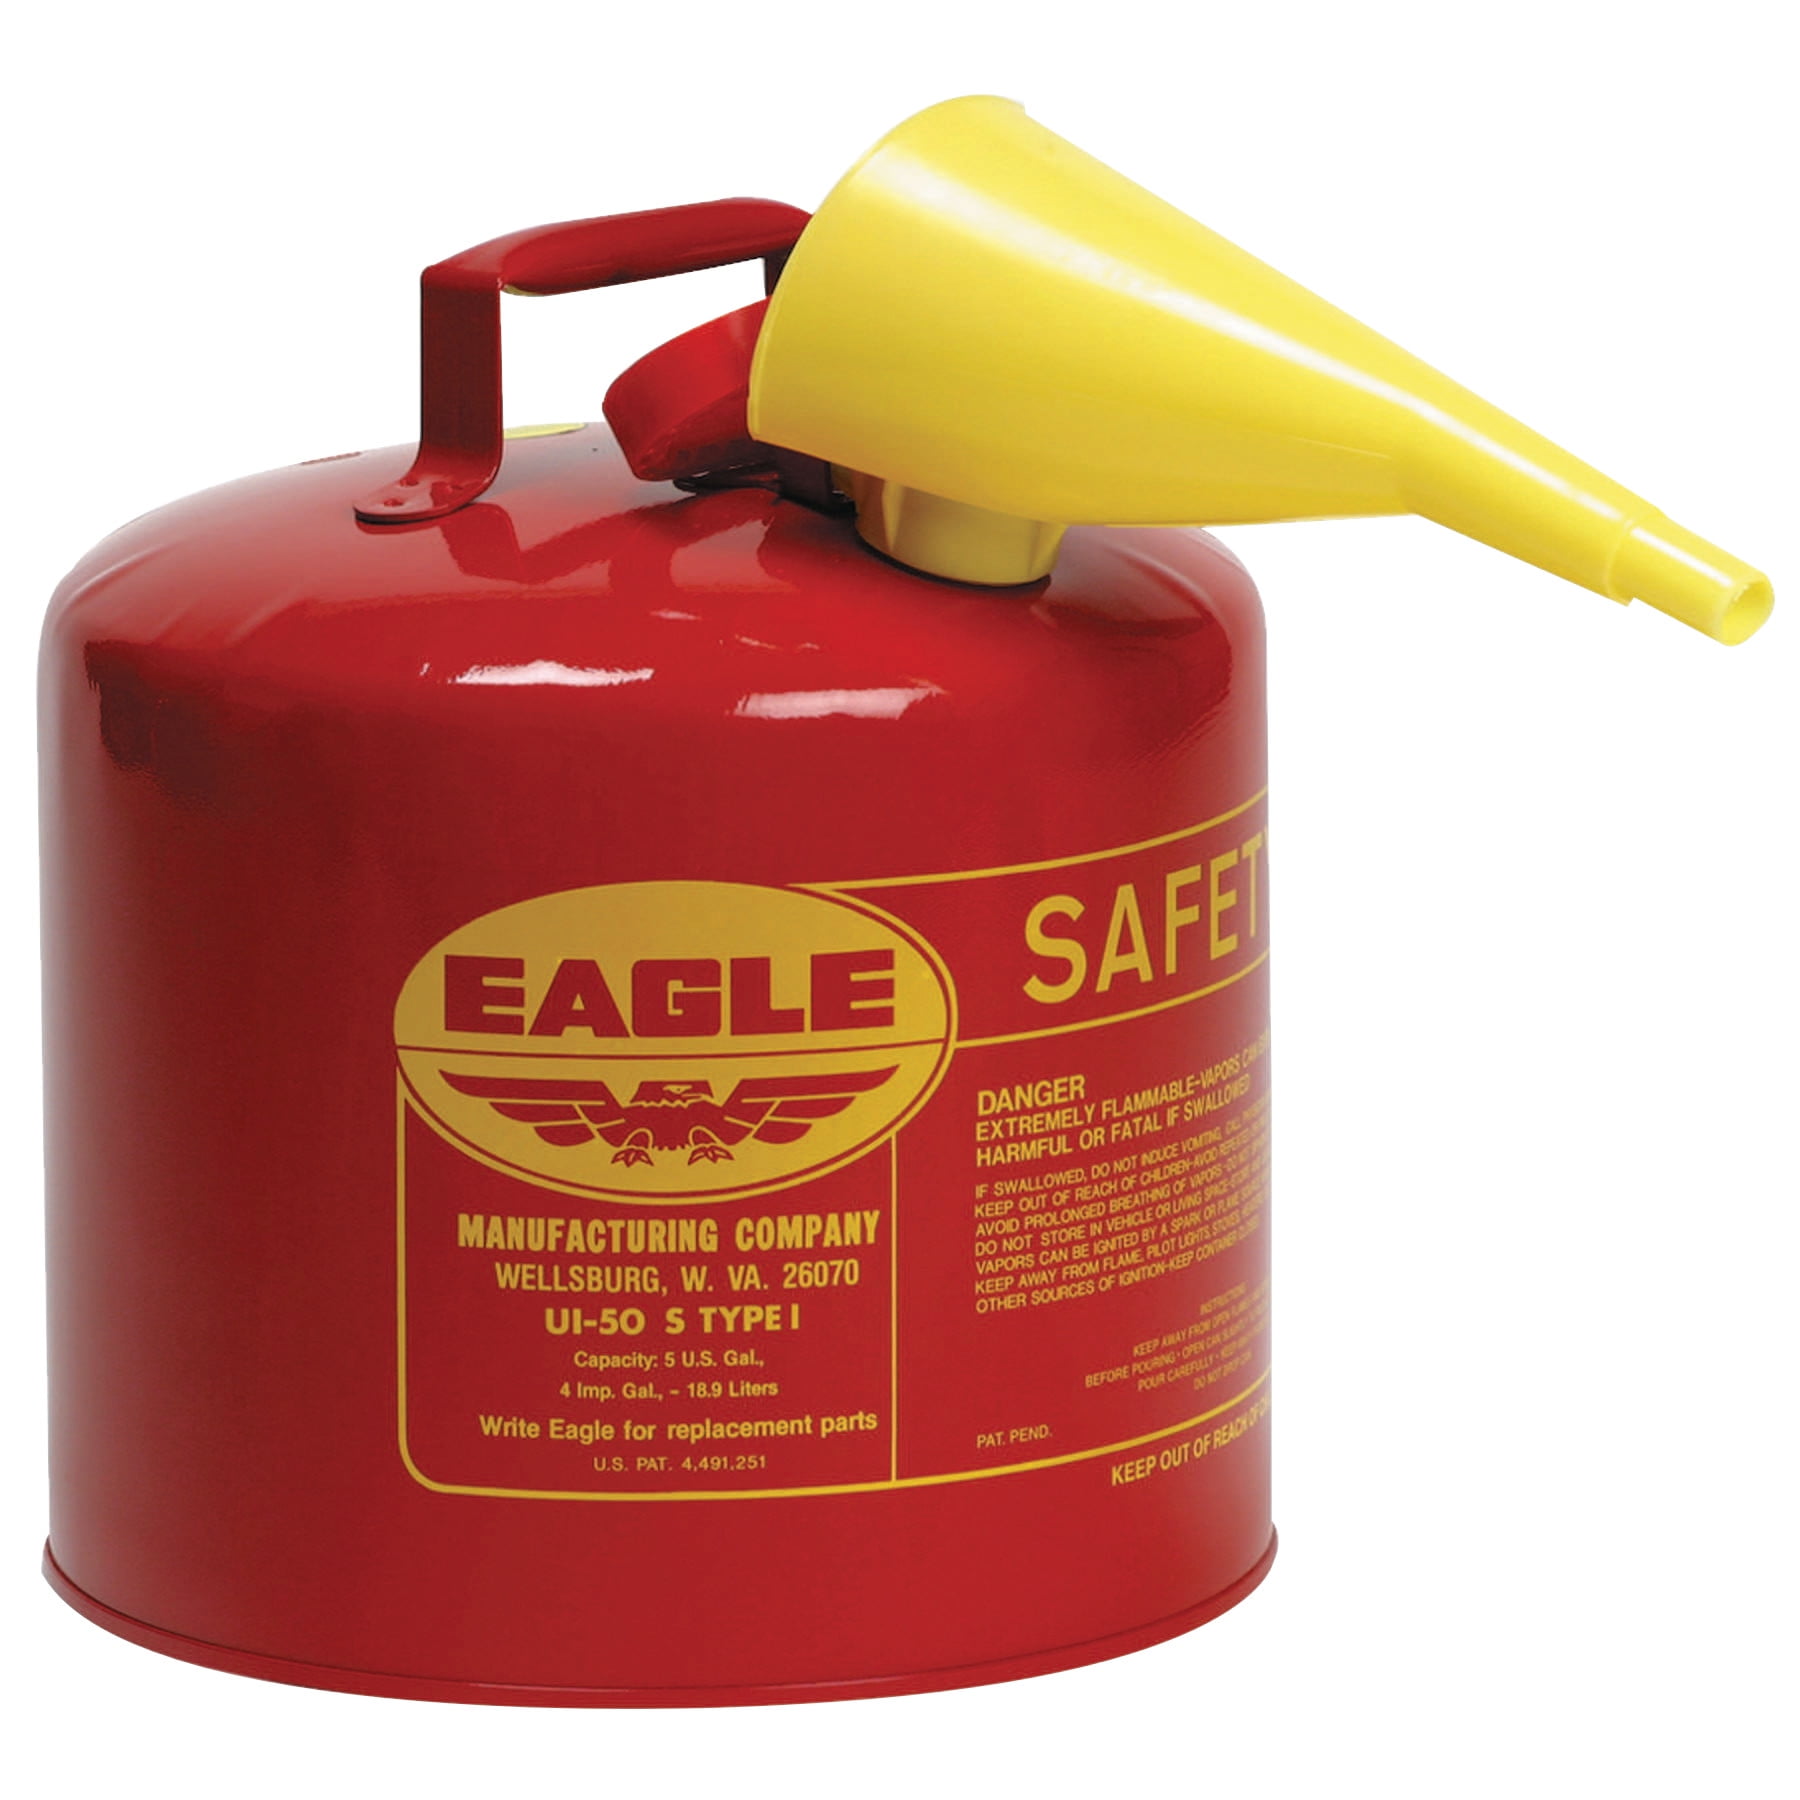 5 Gallons Eagle U2-51-SX5 Type II Safety Can with 5/8" Spout Red 48441221547 